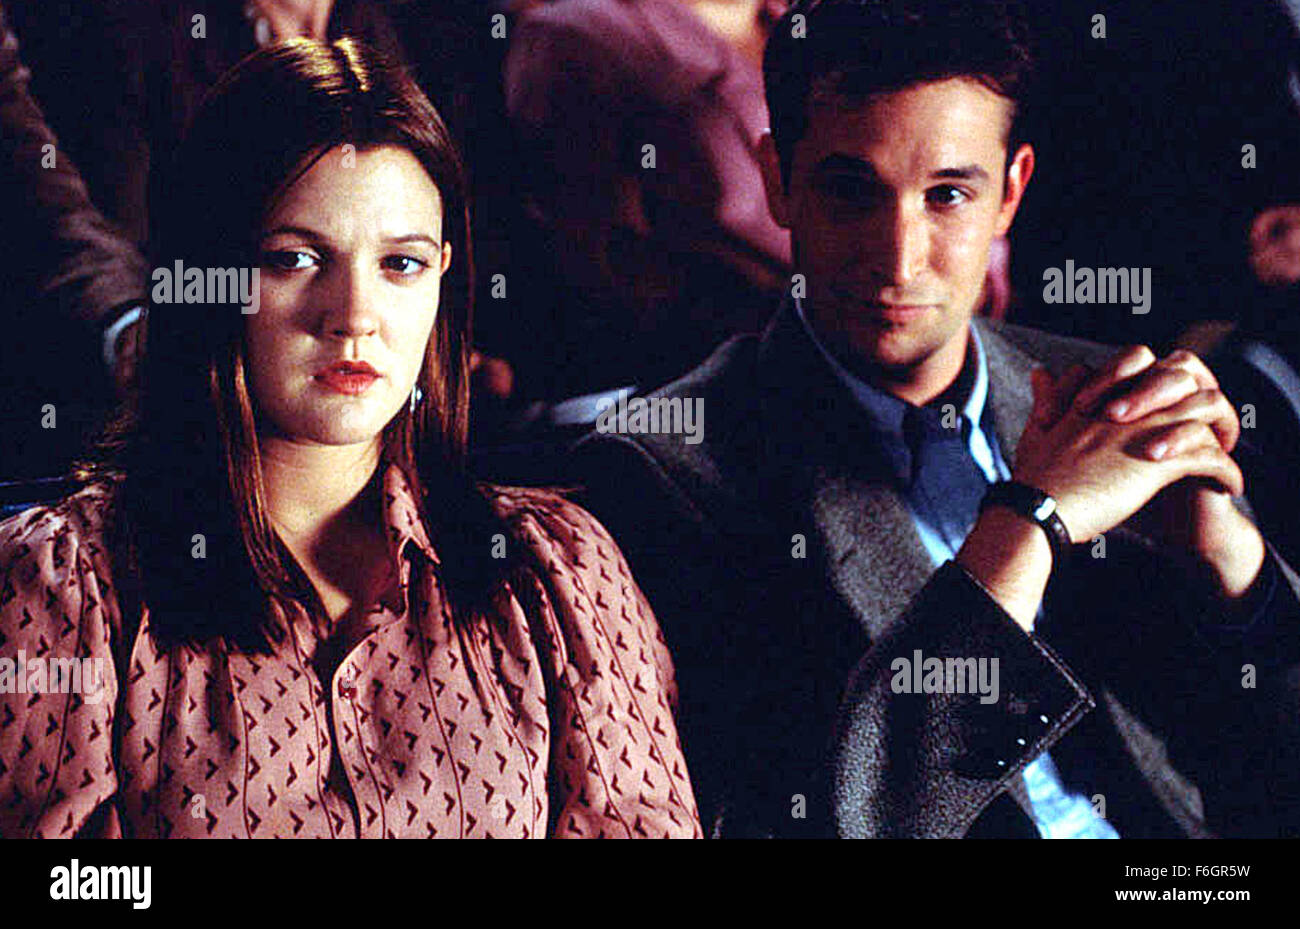 Jan 19, 2001; Los Angeles, CA, USA; DREW BARRYMORE and NOAH WYLE star as Karen Pomeroy and Prof. Kenneth Monnitoff in the thrilling sci-fi drama 'Donnie Darko' directed by Richard Kelly. Stock Photo